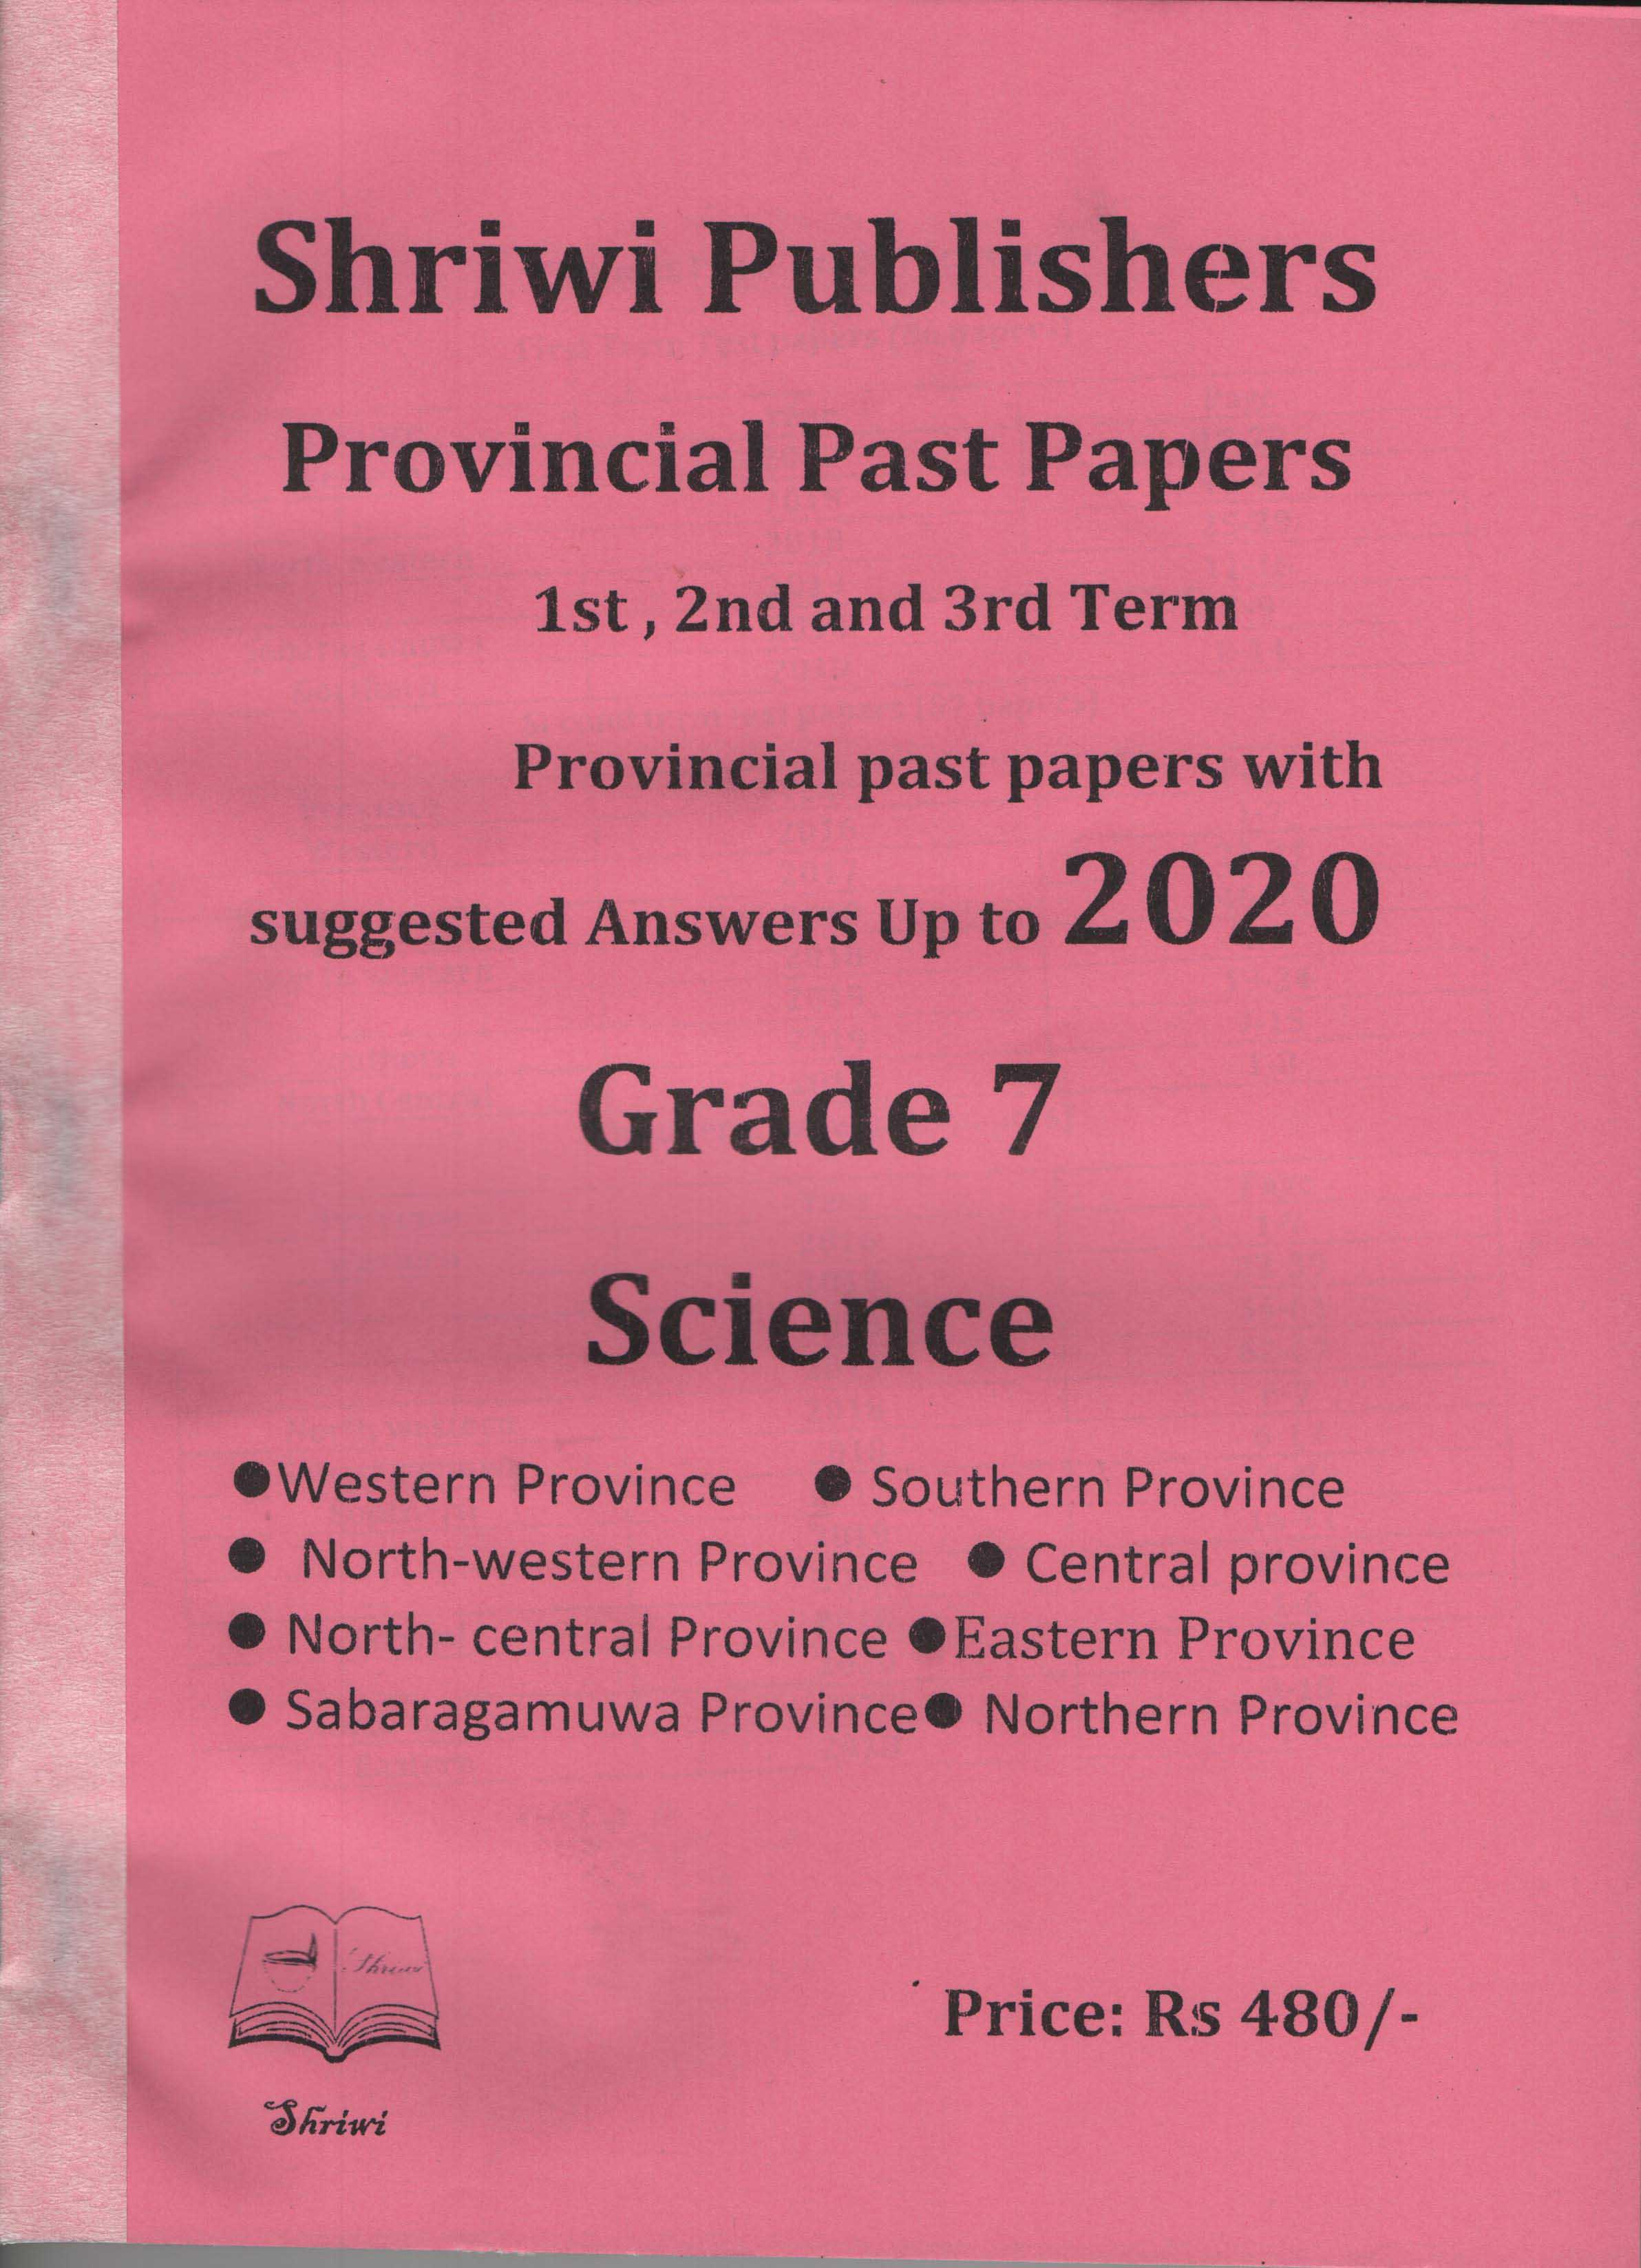 Shriwi Grade 7 Science Provincial Past Papers 1st 2nd and 3rd Term with Suggested Answers up to 2021